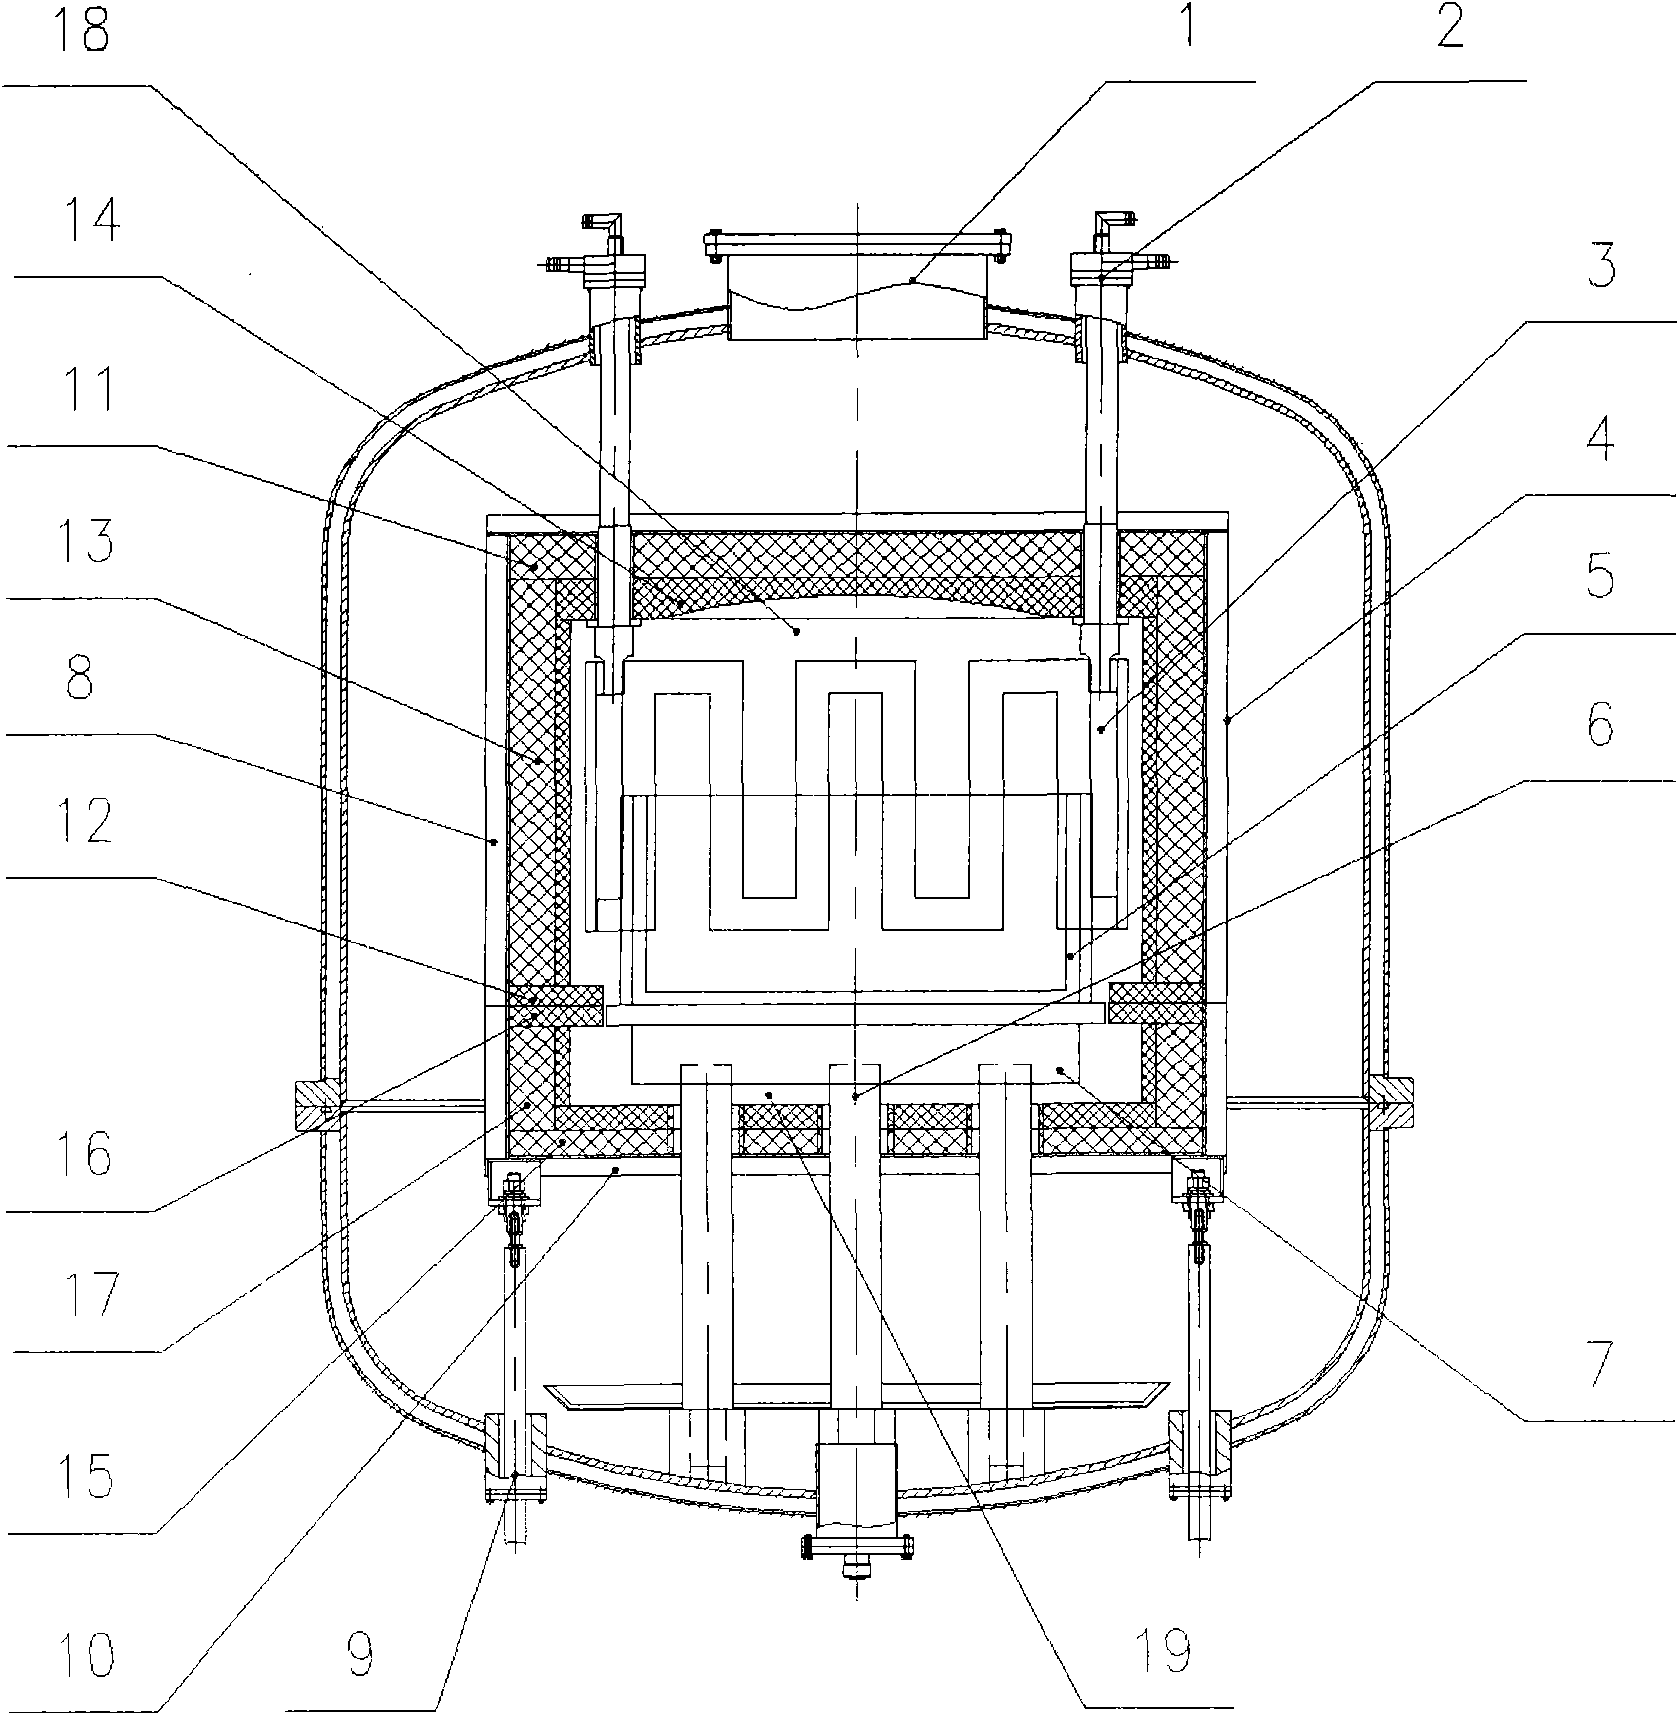 Crystalline silicon ingot furnace thermal field structure with two-stage thermal insulation cage